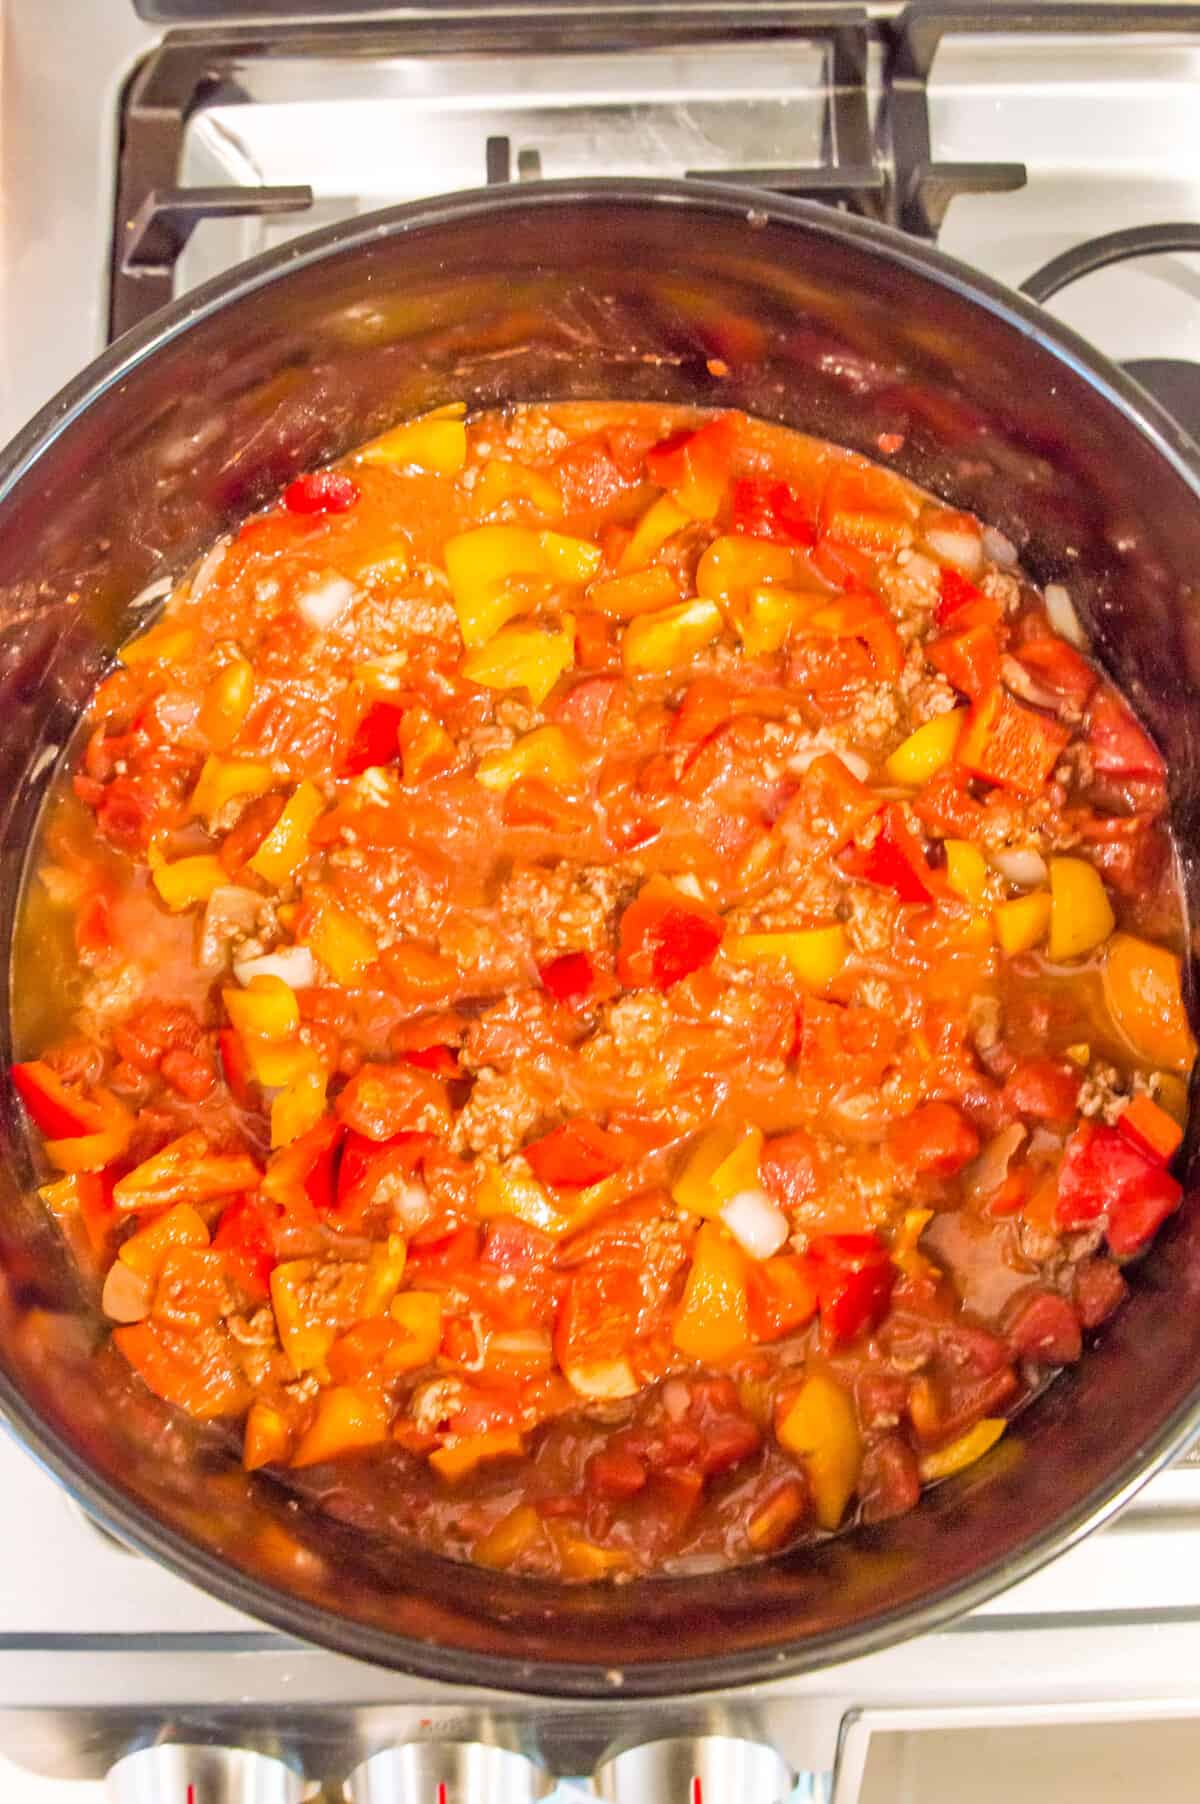 A large pot on the stovetop with a healthy chili in it.